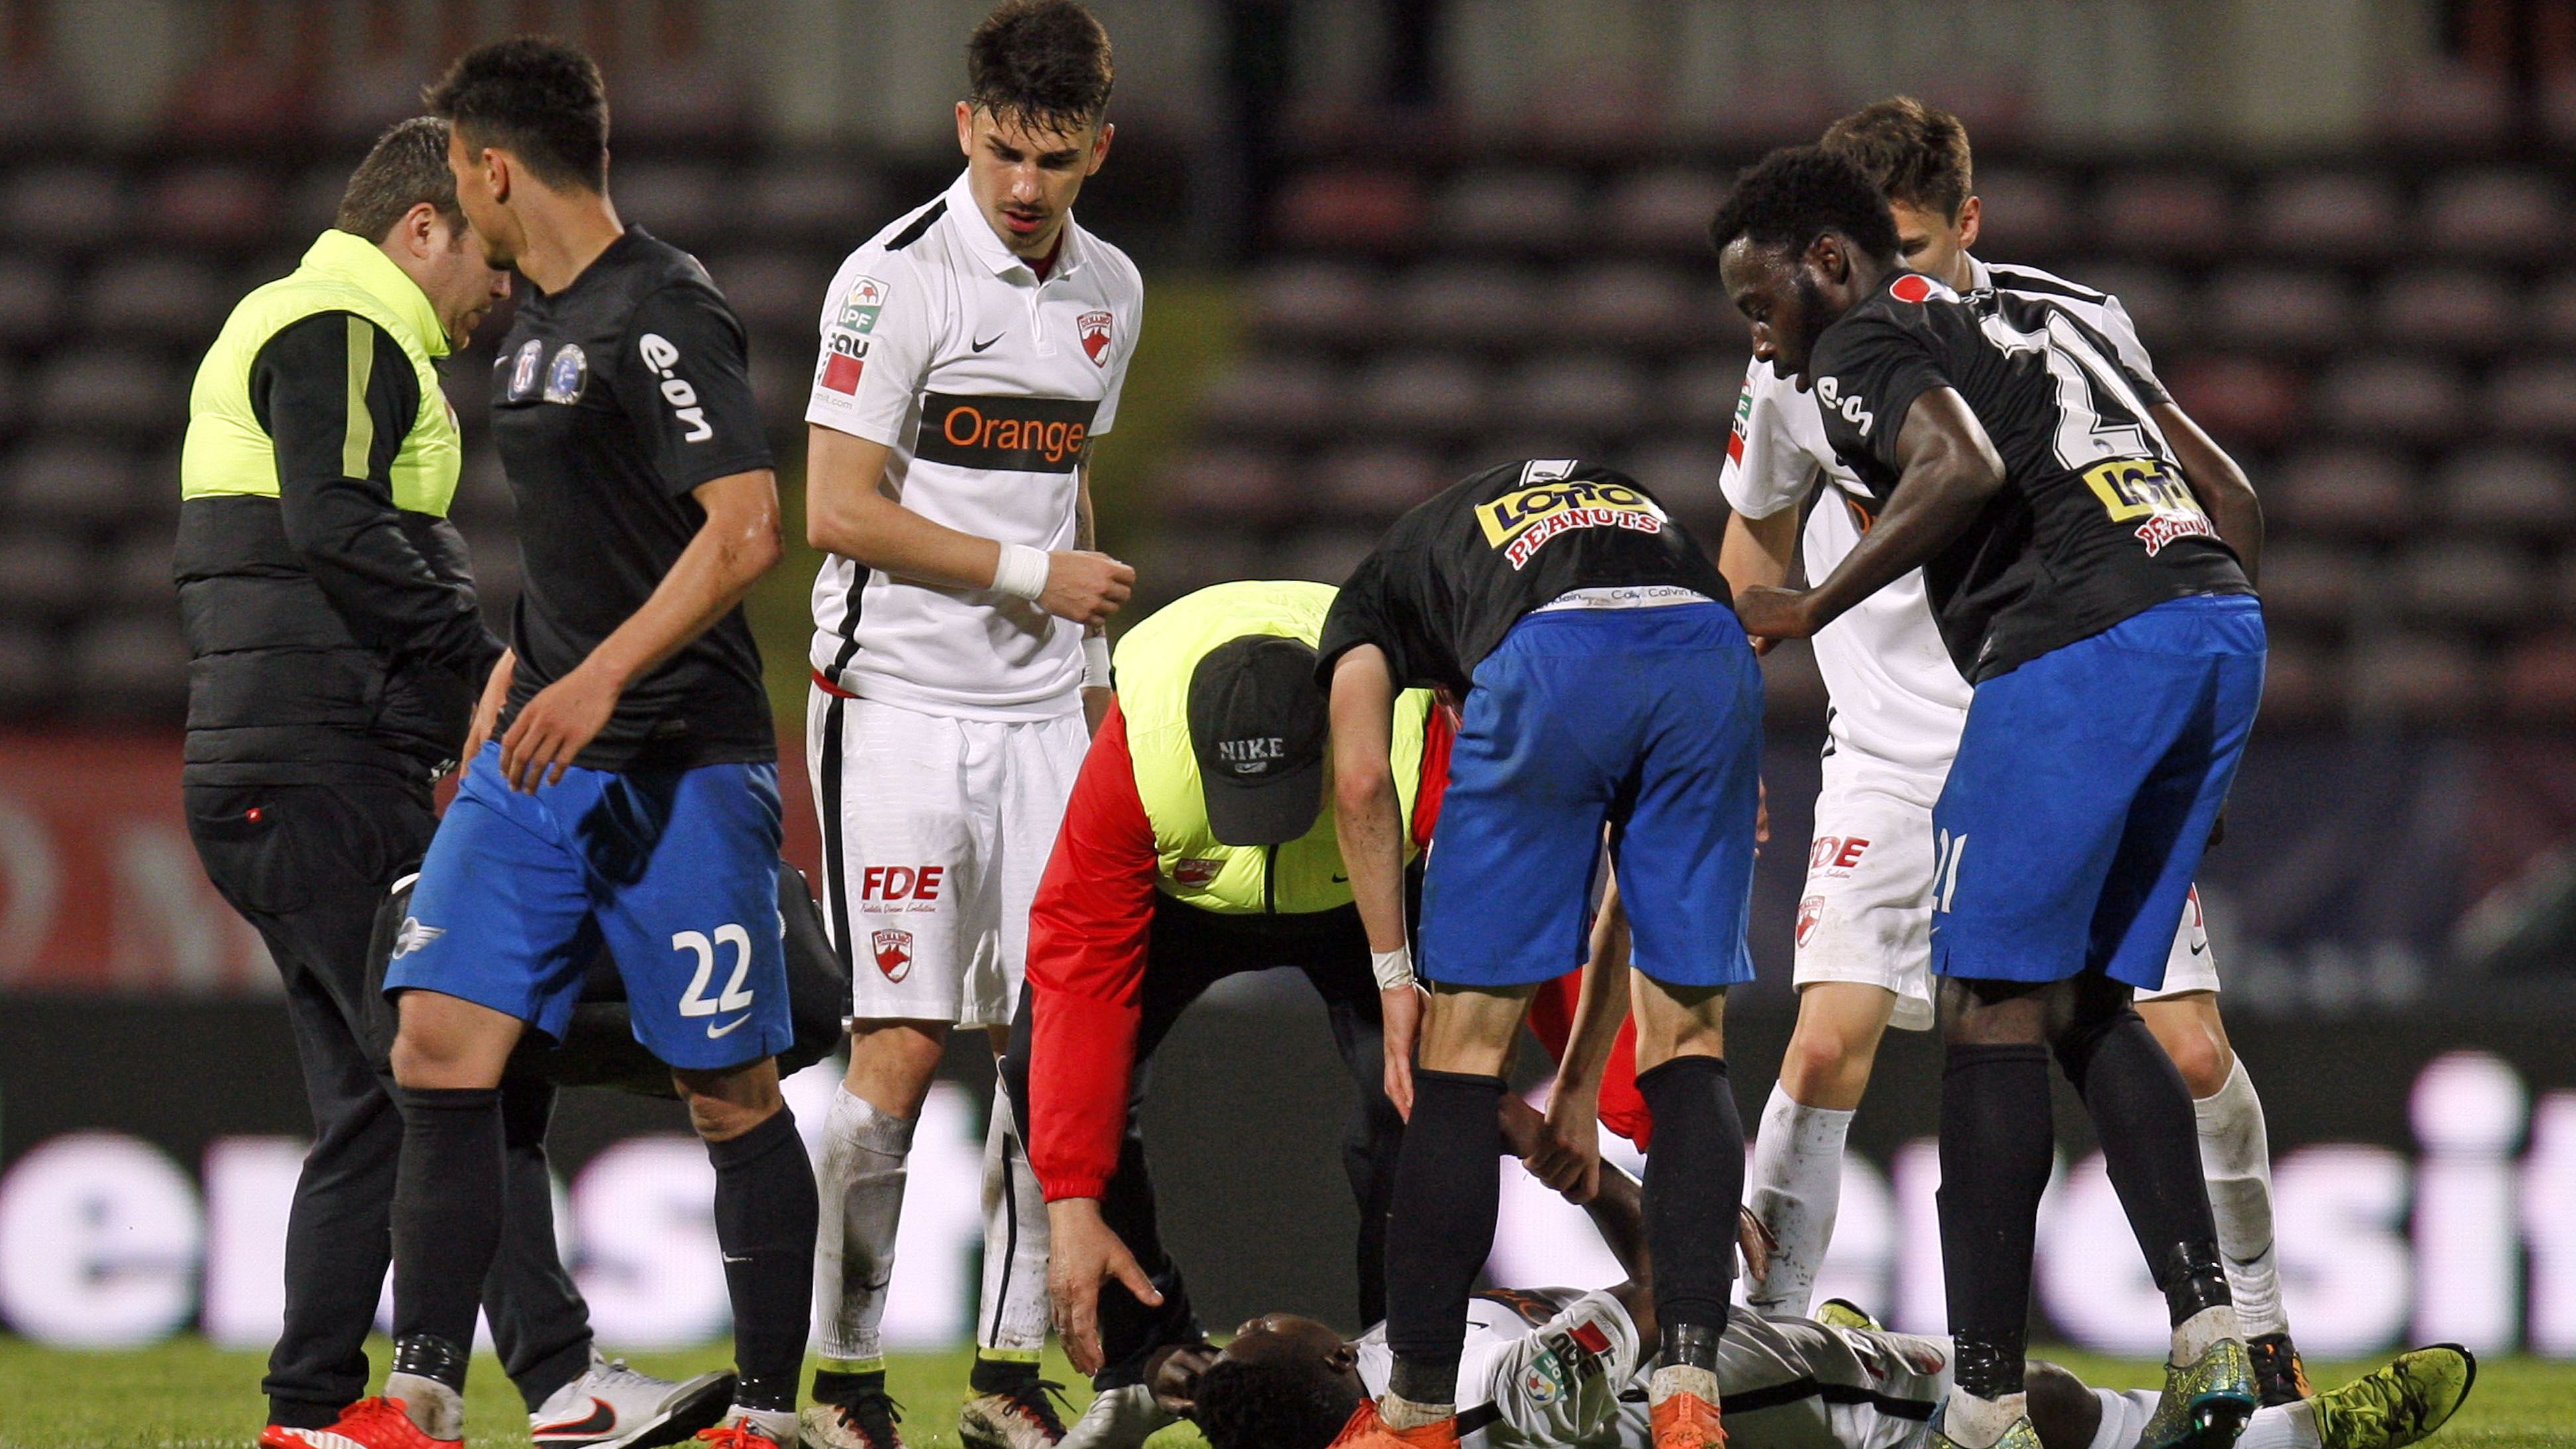 Cameroonian international soccer player Patrick Ekeng lies on pitch after he collapsed during the match between Dinamo Bucharest and Viitorul Constanta in the Romanian capital of Bucharest on Friday. 
